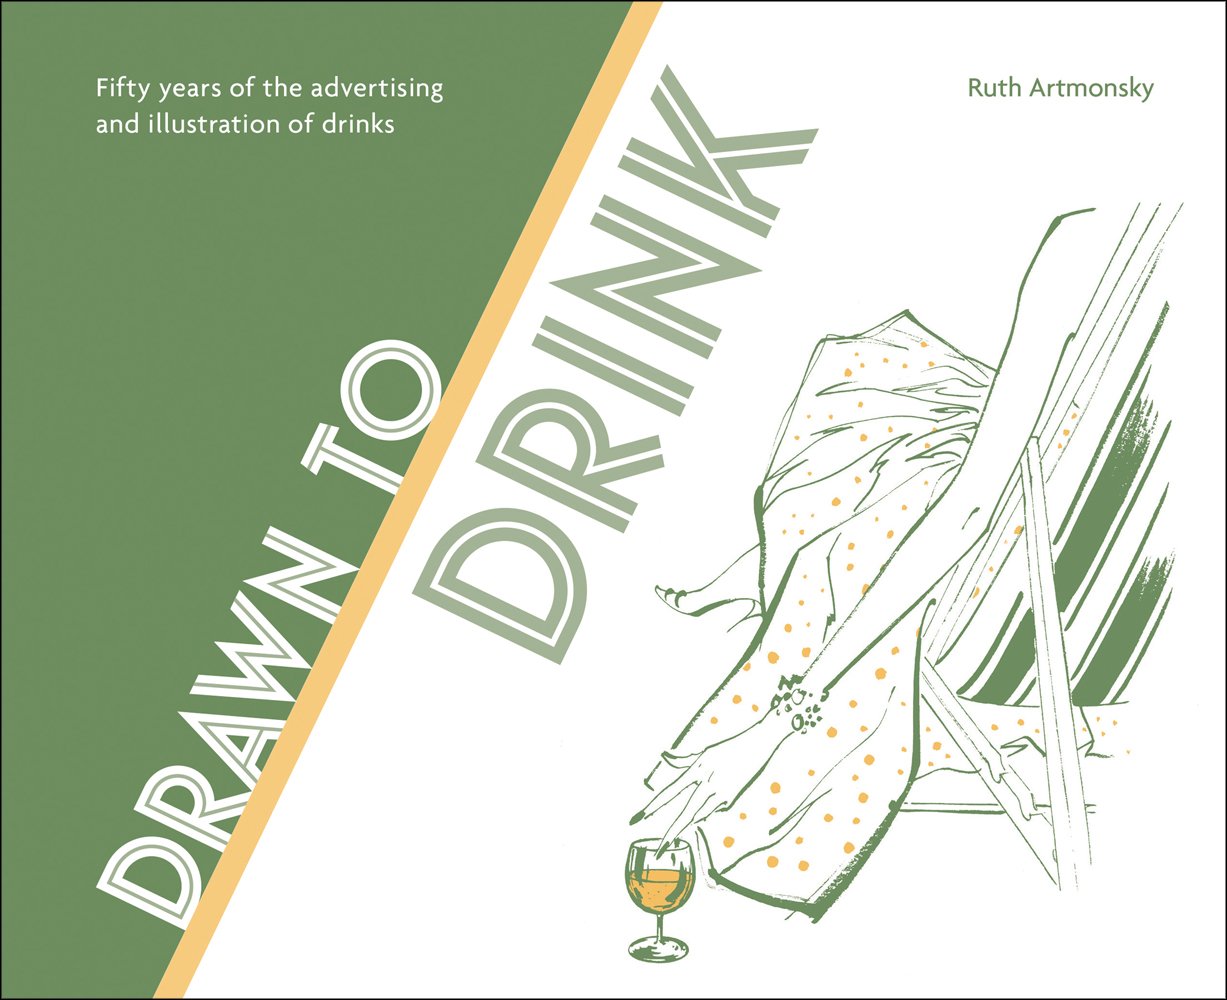 Drawn to Drink: 50 Years of the Advertising and Illustration of Drinks